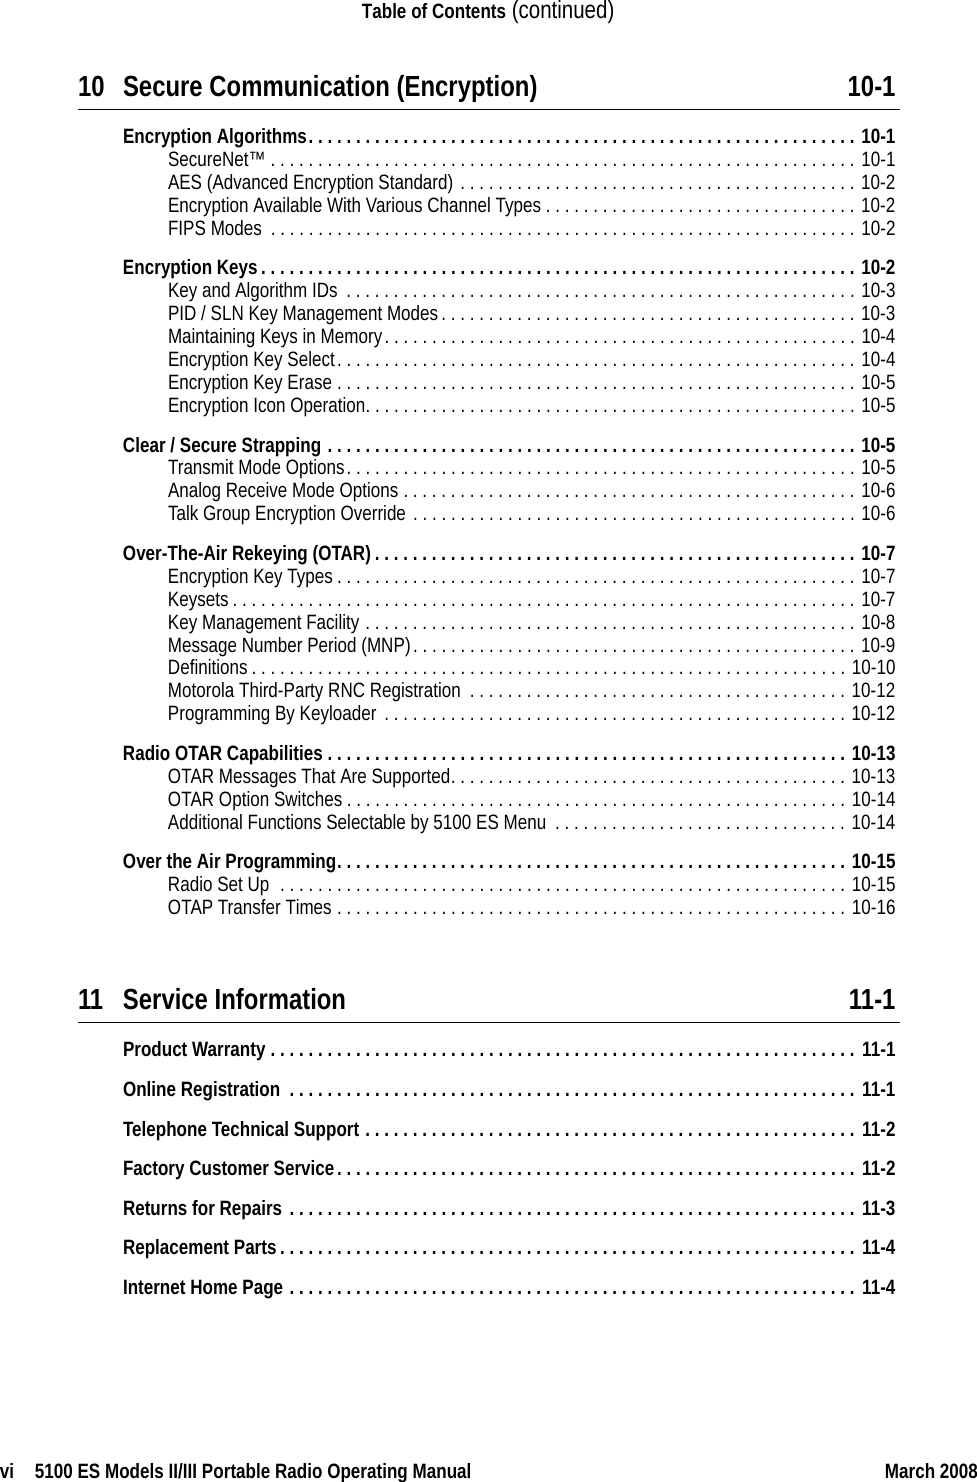 vi  5100 ES Models II/III Portable Radio Operating Manual March 2008Table of Contents (continued)10 Secure Communication (Encryption) 10-1Encryption Algorithms. . . . . . . . . . . . . . . . . . . . . . . . . . . . . . . . . . . . . . . . . . . . . . . . . . . . . . . . . . 10-1SecureNet™ . . . . . . . . . . . . . . . . . . . . . . . . . . . . . . . . . . . . . . . . . . . . . . . . . . . . . . . . . . . . . . 10-1AES (Advanced Encryption Standard) . . . . . . . . . . . . . . . . . . . . . . . . . . . . . . . . . . . . . . . . . . 10-2Encryption Available With Various Channel Types . . . . . . . . . . . . . . . . . . . . . . . . . . . . . . . . . 10-2FIPS Modes  . . . . . . . . . . . . . . . . . . . . . . . . . . . . . . . . . . . . . . . . . . . . . . . . . . . . . . . . . . . . . . 10-2Encryption Keys. . . . . . . . . . . . . . . . . . . . . . . . . . . . . . . . . . . . . . . . . . . . . . . . . . . . . . . . . . . . . . . 10-2Key and Algorithm IDs . . . . . . . . . . . . . . . . . . . . . . . . . . . . . . . . . . . . . . . . . . . . . . . . . . . . . . 10-3PID / SLN Key Management Modes. . . . . . . . . . . . . . . . . . . . . . . . . . . . . . . . . . . . . . . . . . . . 10-3Maintaining Keys in Memory. . . . . . . . . . . . . . . . . . . . . . . . . . . . . . . . . . . . . . . . . . . . . . . . . . 10-4Encryption Key Select. . . . . . . . . . . . . . . . . . . . . . . . . . . . . . . . . . . . . . . . . . . . . . . . . . . . . . . 10-4Encryption Key Erase . . . . . . . . . . . . . . . . . . . . . . . . . . . . . . . . . . . . . . . . . . . . . . . . . . . . . . . 10-5Encryption Icon Operation. . . . . . . . . . . . . . . . . . . . . . . . . . . . . . . . . . . . . . . . . . . . . . . . . . . . 10-5Clear / Secure Strapping . . . . . . . . . . . . . . . . . . . . . . . . . . . . . . . . . . . . . . . . . . . . . . . . . . . . . . . . 10-5Transmit Mode Options. . . . . . . . . . . . . . . . . . . . . . . . . . . . . . . . . . . . . . . . . . . . . . . . . . . . . . 10-5Analog Receive Mode Options . . . . . . . . . . . . . . . . . . . . . . . . . . . . . . . . . . . . . . . . . . . . . . . . 10-6Talk Group Encryption Override . . . . . . . . . . . . . . . . . . . . . . . . . . . . . . . . . . . . . . . . . . . . . . . 10-6Over-The-Air Rekeying (OTAR). . . . . . . . . . . . . . . . . . . . . . . . . . . . . . . . . . . . . . . . . . . . . . . . . . . 10-7Encryption Key Types . . . . . . . . . . . . . . . . . . . . . . . . . . . . . . . . . . . . . . . . . . . . . . . . . . . . . . . 10-7Keysets. . . . . . . . . . . . . . . . . . . . . . . . . . . . . . . . . . . . . . . . . . . . . . . . . . . . . . . . . . . . . . . . . . 10-7Key Management Facility . . . . . . . . . . . . . . . . . . . . . . . . . . . . . . . . . . . . . . . . . . . . . . . . . . . . 10-8Message Number Period (MNP). . . . . . . . . . . . . . . . . . . . . . . . . . . . . . . . . . . . . . . . . . . . . . . 10-9Definitions. . . . . . . . . . . . . . . . . . . . . . . . . . . . . . . . . . . . . . . . . . . . . . . . . . . . . . . . . . . . . . . 10-10Motorola Third-Party RNC Registration  . . . . . . . . . . . . . . . . . . . . . . . . . . . . . . . . . . . . . . . . 10-12Programming By Keyloader . . . . . . . . . . . . . . . . . . . . . . . . . . . . . . . . . . . . . . . . . . . . . . . . . 10-12Radio OTAR Capabilities . . . . . . . . . . . . . . . . . . . . . . . . . . . . . . . . . . . . . . . . . . . . . . . . . . . . . . . 10-13OTAR Messages That Are Supported. . . . . . . . . . . . . . . . . . . . . . . . . . . . . . . . . . . . . . . . . . 10-13OTAR Option Switches . . . . . . . . . . . . . . . . . . . . . . . . . . . . . . . . . . . . . . . . . . . . . . . . . . . . . 10-14Additional Functions Selectable by 5100 ES Menu . . . . . . . . . . . . . . . . . . . . . . . . . . . . . . . 10-14Over the Air Programming. . . . . . . . . . . . . . . . . . . . . . . . . . . . . . . . . . . . . . . . . . . . . . . . . . . . . . 10-15Radio Set Up  . . . . . . . . . . . . . . . . . . . . . . . . . . . . . . . . . . . . . . . . . . . . . . . . . . . . . . . . . . . . 10-15OTAP Transfer Times . . . . . . . . . . . . . . . . . . . . . . . . . . . . . . . . . . . . . . . . . . . . . . . . . . . . . . 10-1611 Service Information 11-1Product Warranty . . . . . . . . . . . . . . . . . . . . . . . . . . . . . . . . . . . . . . . . . . . . . . . . . . . . . . . . . . . . . . 11-1Online Registration  . . . . . . . . . . . . . . . . . . . . . . . . . . . . . . . . . . . . . . . . . . . . . . . . . . . . . . . . . . . . 11-1Telephone Technical Support . . . . . . . . . . . . . . . . . . . . . . . . . . . . . . . . . . . . . . . . . . . . . . . . . . . . 11-2Factory Customer Service. . . . . . . . . . . . . . . . . . . . . . . . . . . . . . . . . . . . . . . . . . . . . . . . . . . . . . . 11-2Returns for Repairs . . . . . . . . . . . . . . . . . . . . . . . . . . . . . . . . . . . . . . . . . . . . . . . . . . . . . . . . . . . . 11-3Replacement Parts. . . . . . . . . . . . . . . . . . . . . . . . . . . . . . . . . . . . . . . . . . . . . . . . . . . . . . . . . . . . . 11-4Internet Home Page . . . . . . . . . . . . . . . . . . . . . . . . . . . . . . . . . . . . . . . . . . . . . . . . . . . . . . . . . . . . 11-4